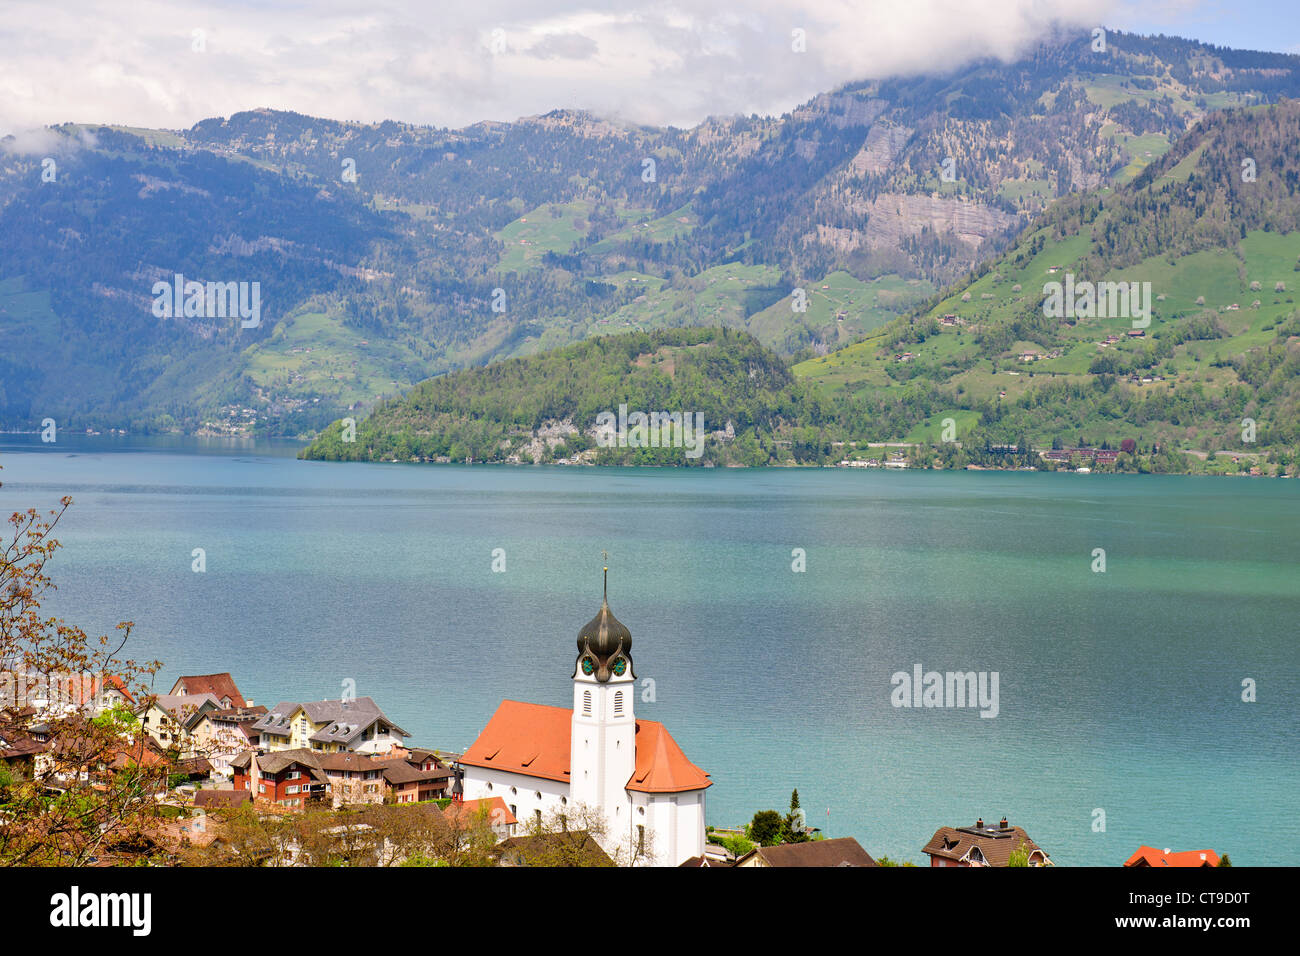 St. Heinrich Chapel,the longest cable car in central Switzerland,Beckenried,Lake Lucerne,Switzerland Stock Photo